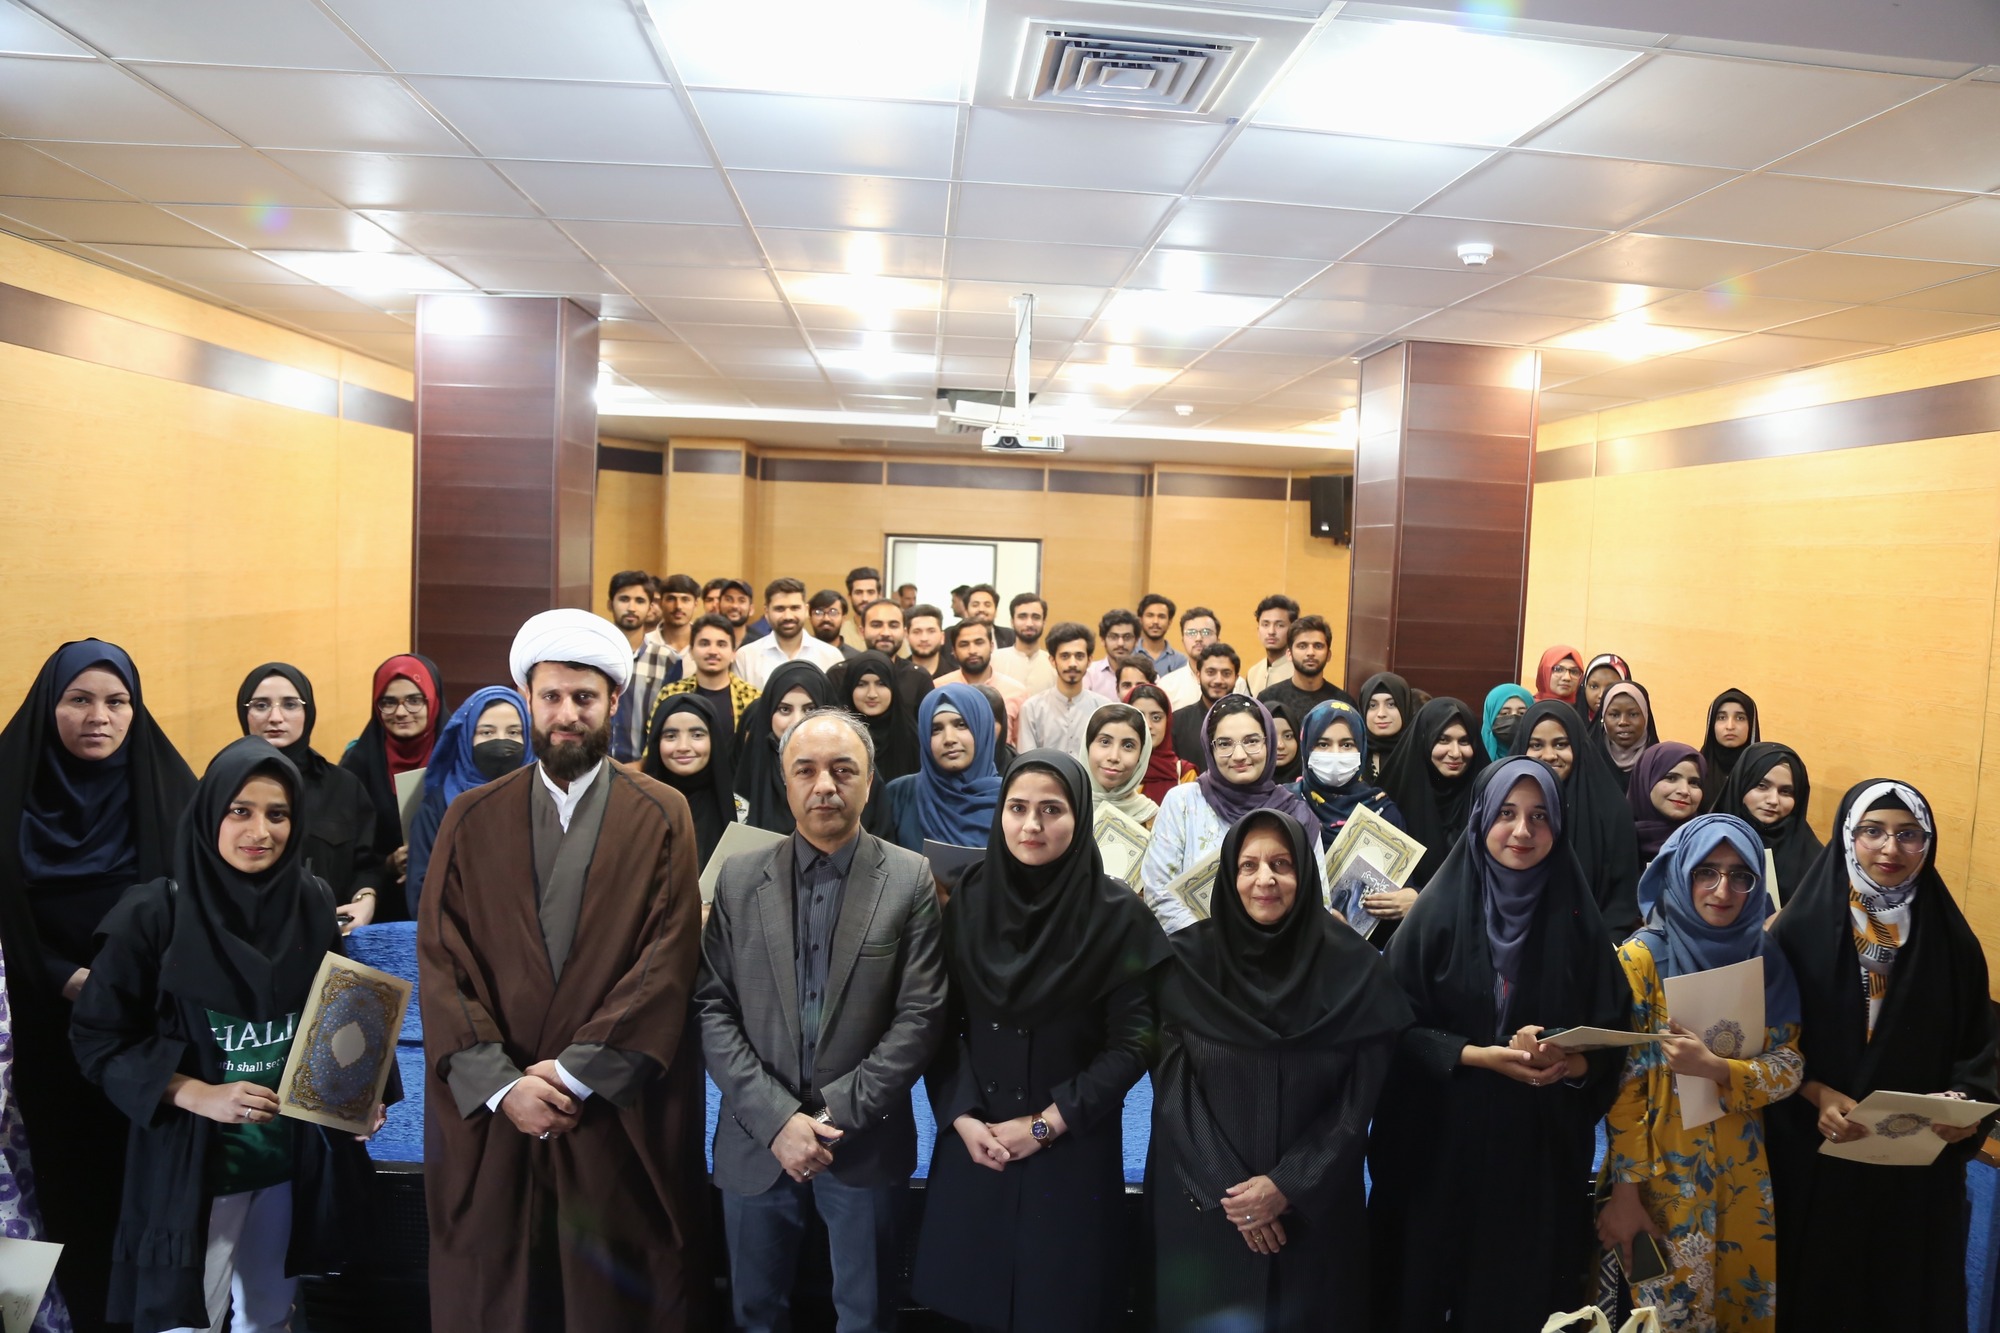 The Contemplation in the Holy Quran and Womanliness for international students reached its final station 